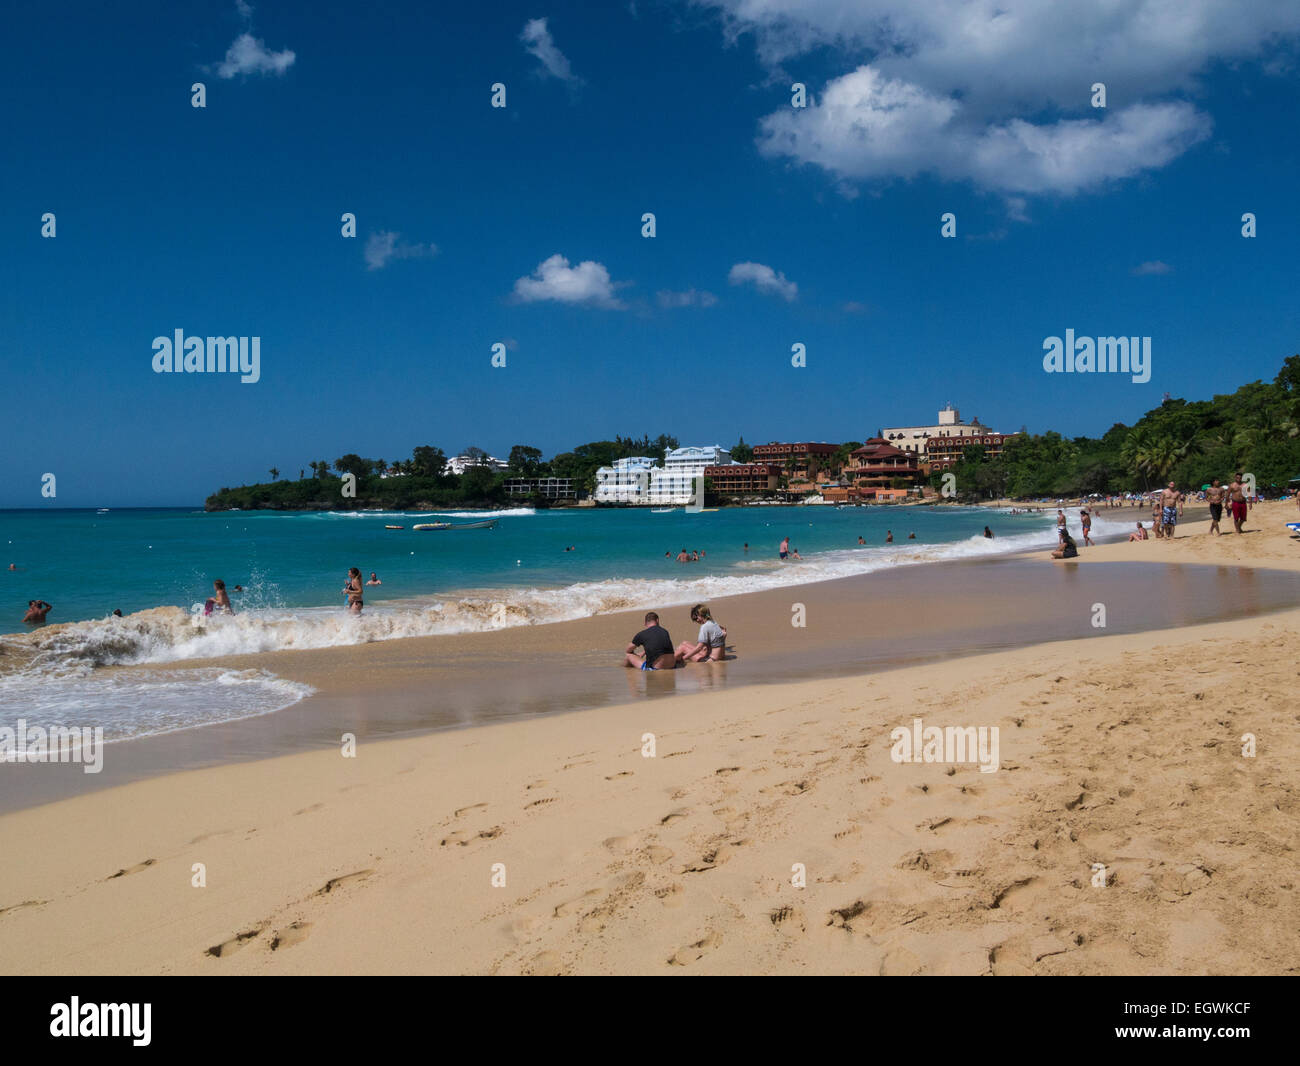 View along the popular public beach of Playa de Sosua Dominican Republic people holidaying on lovely winters day pristine sandy beach Stock Photo